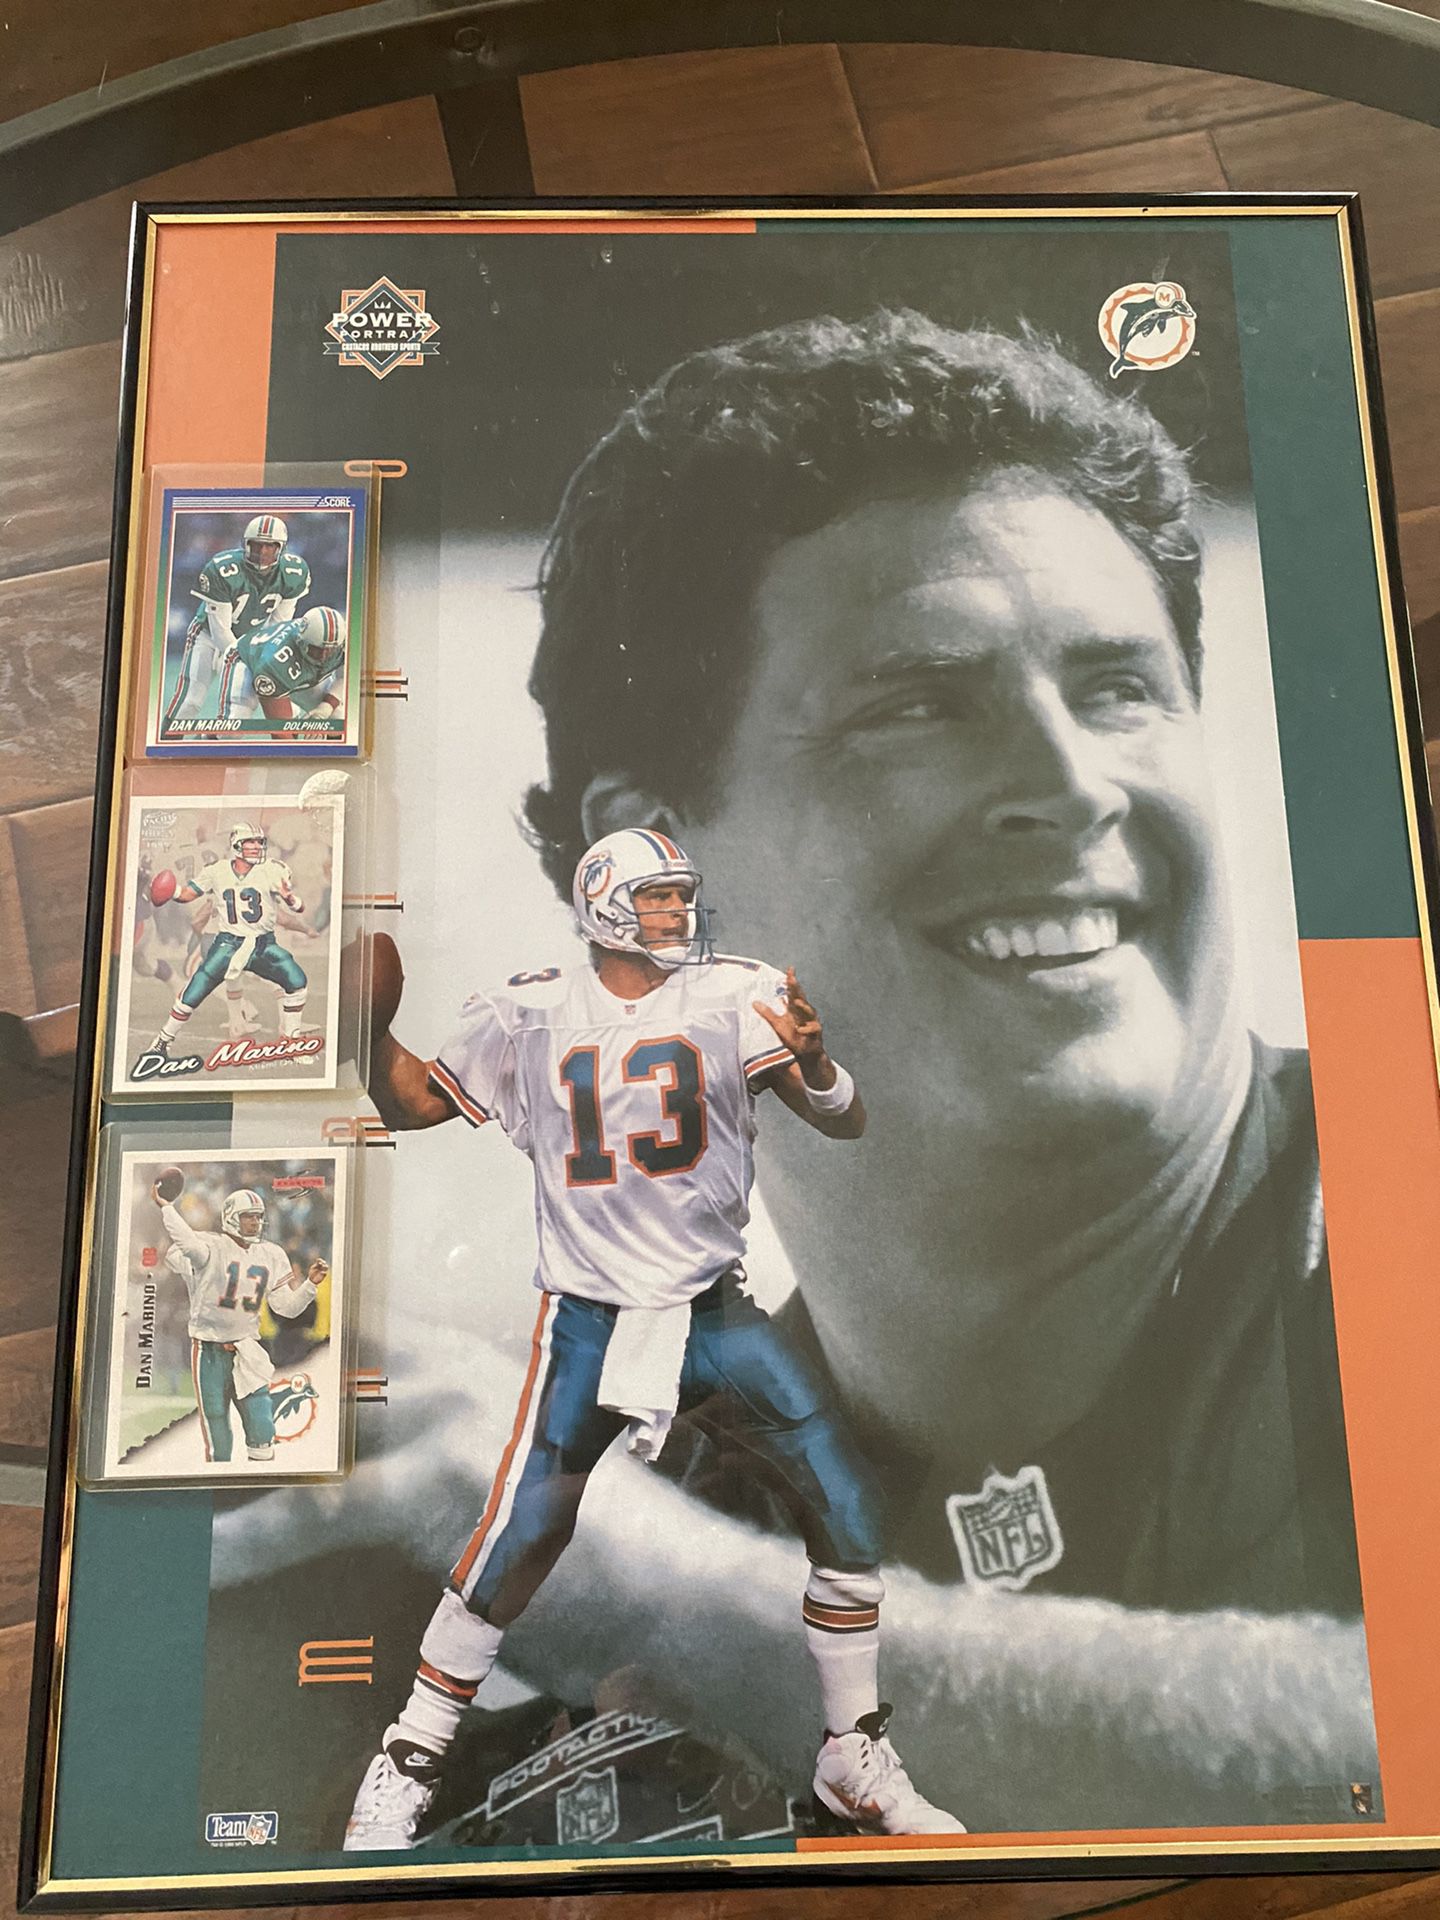 Large Marino picture in frame with 3 sports cards